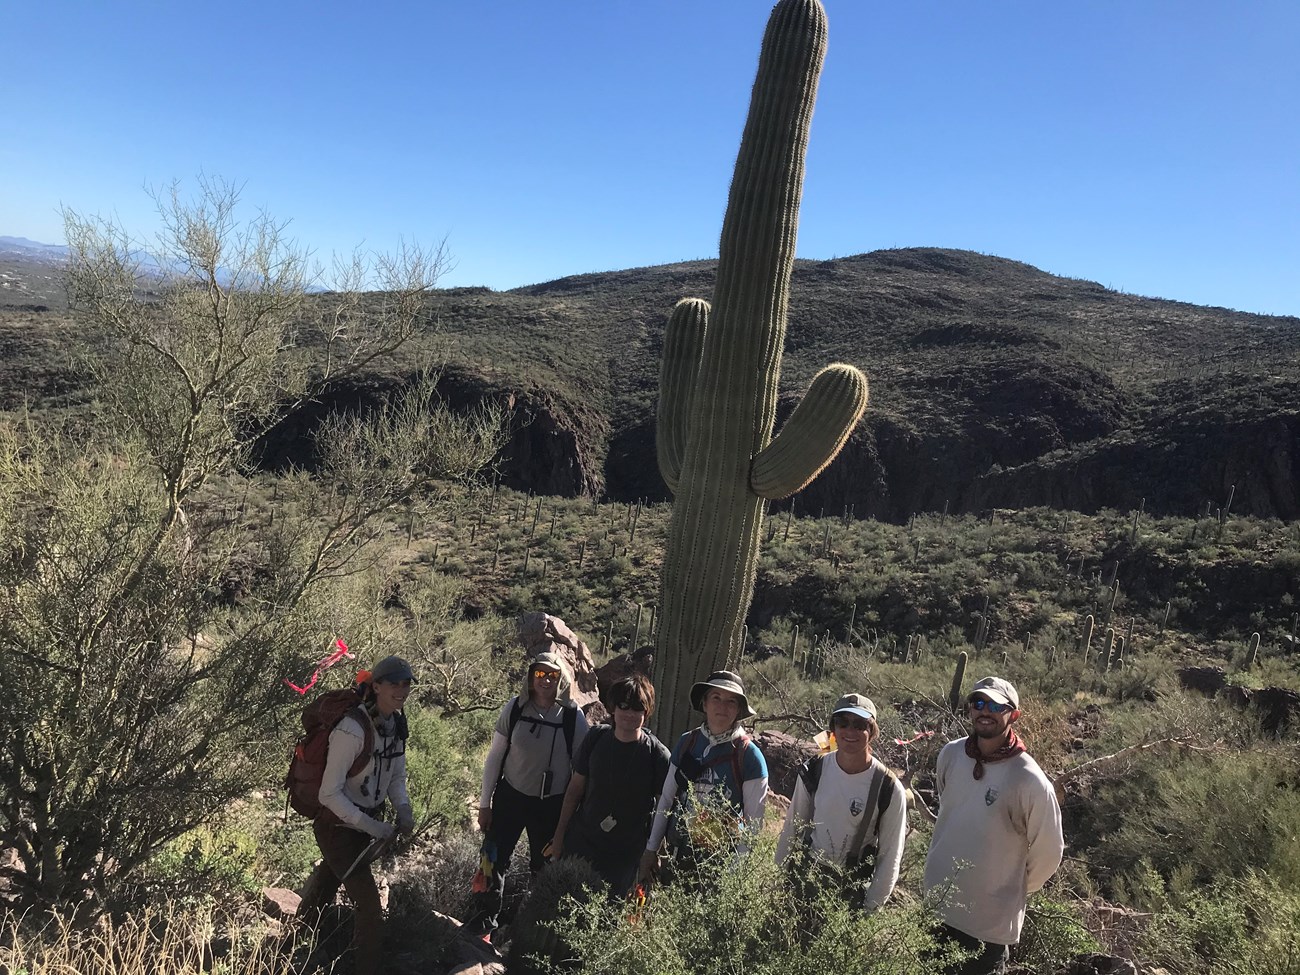 Group photo. Behind them is a tall saguaro and a nice mountainous view.